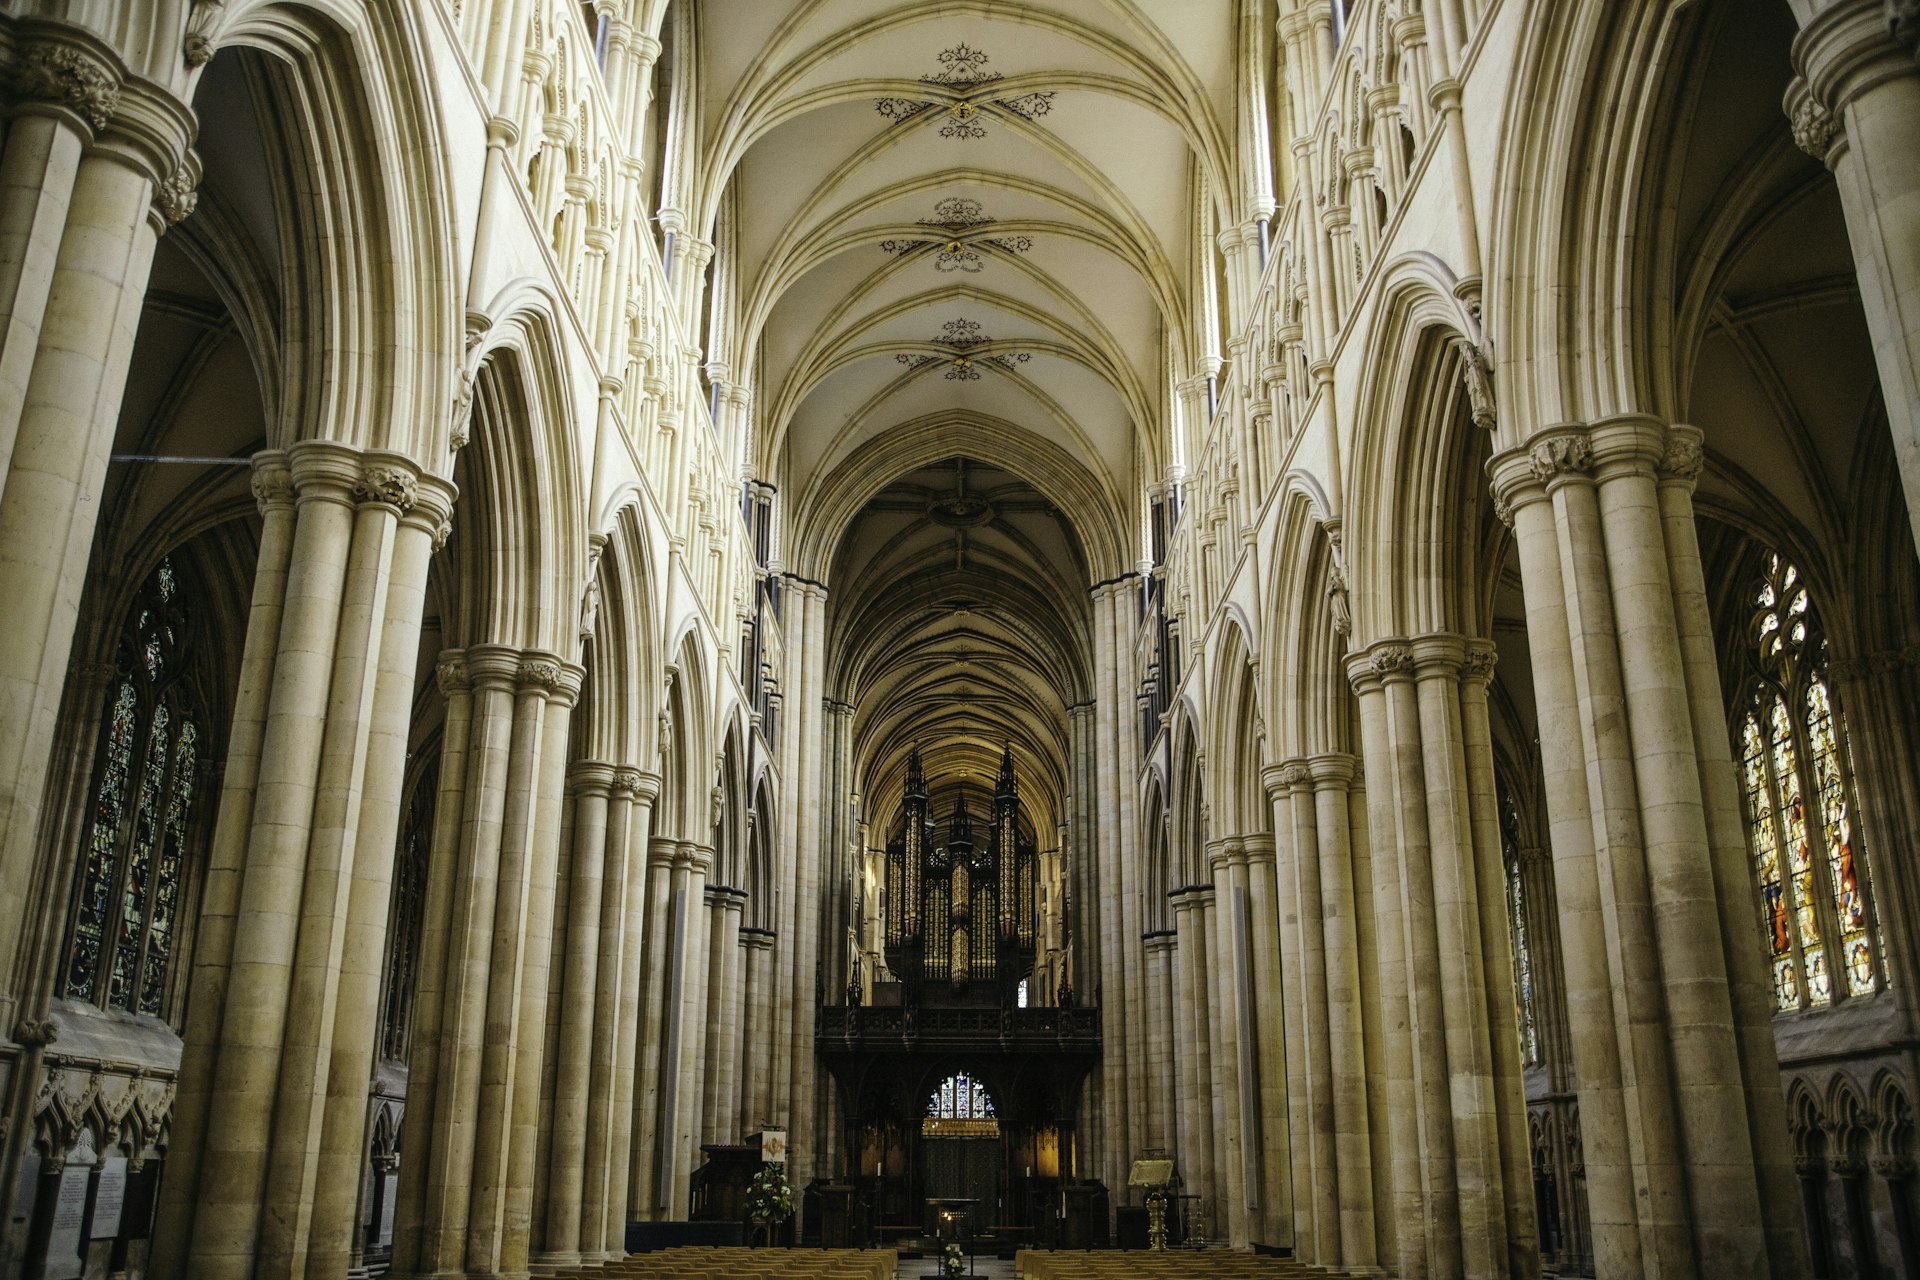 An interior shot of the incredible vaulted ceiling of Beverley Minster church